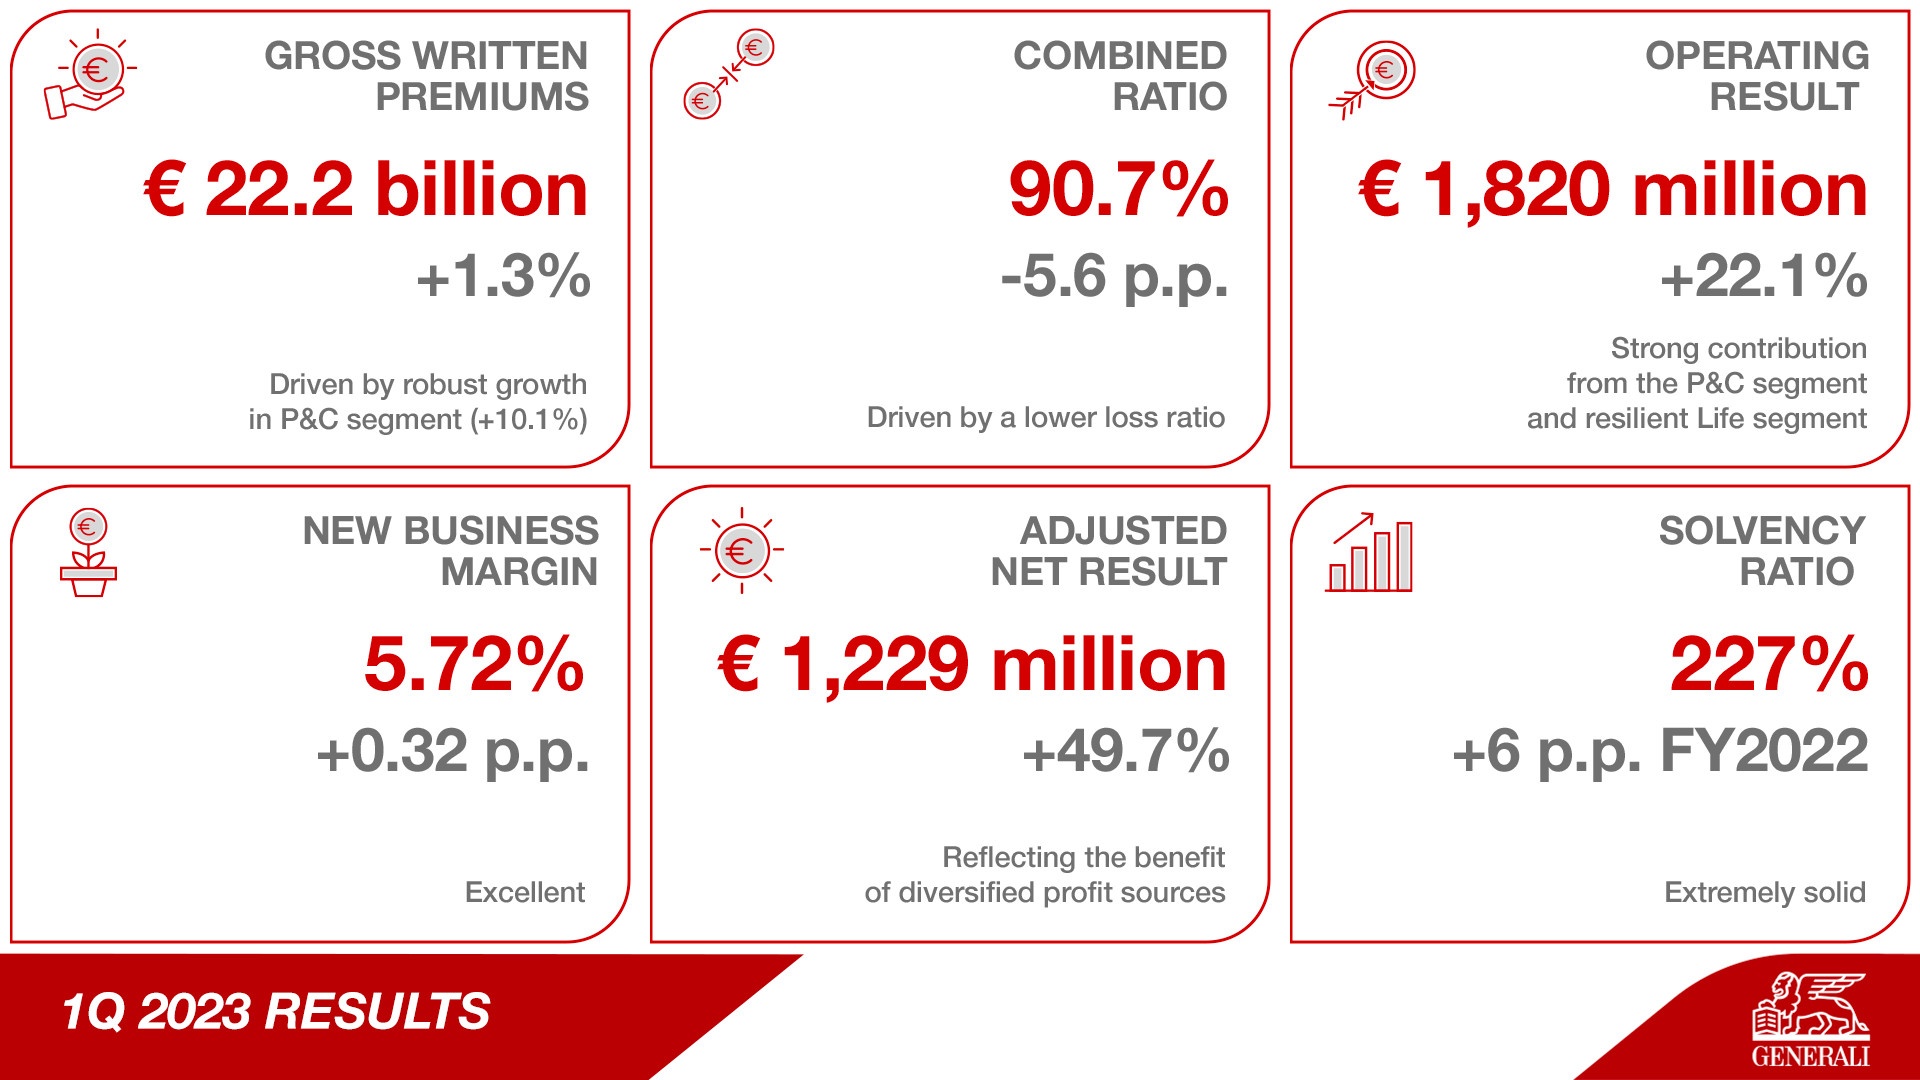 Generali confirms its extremely solid capital position